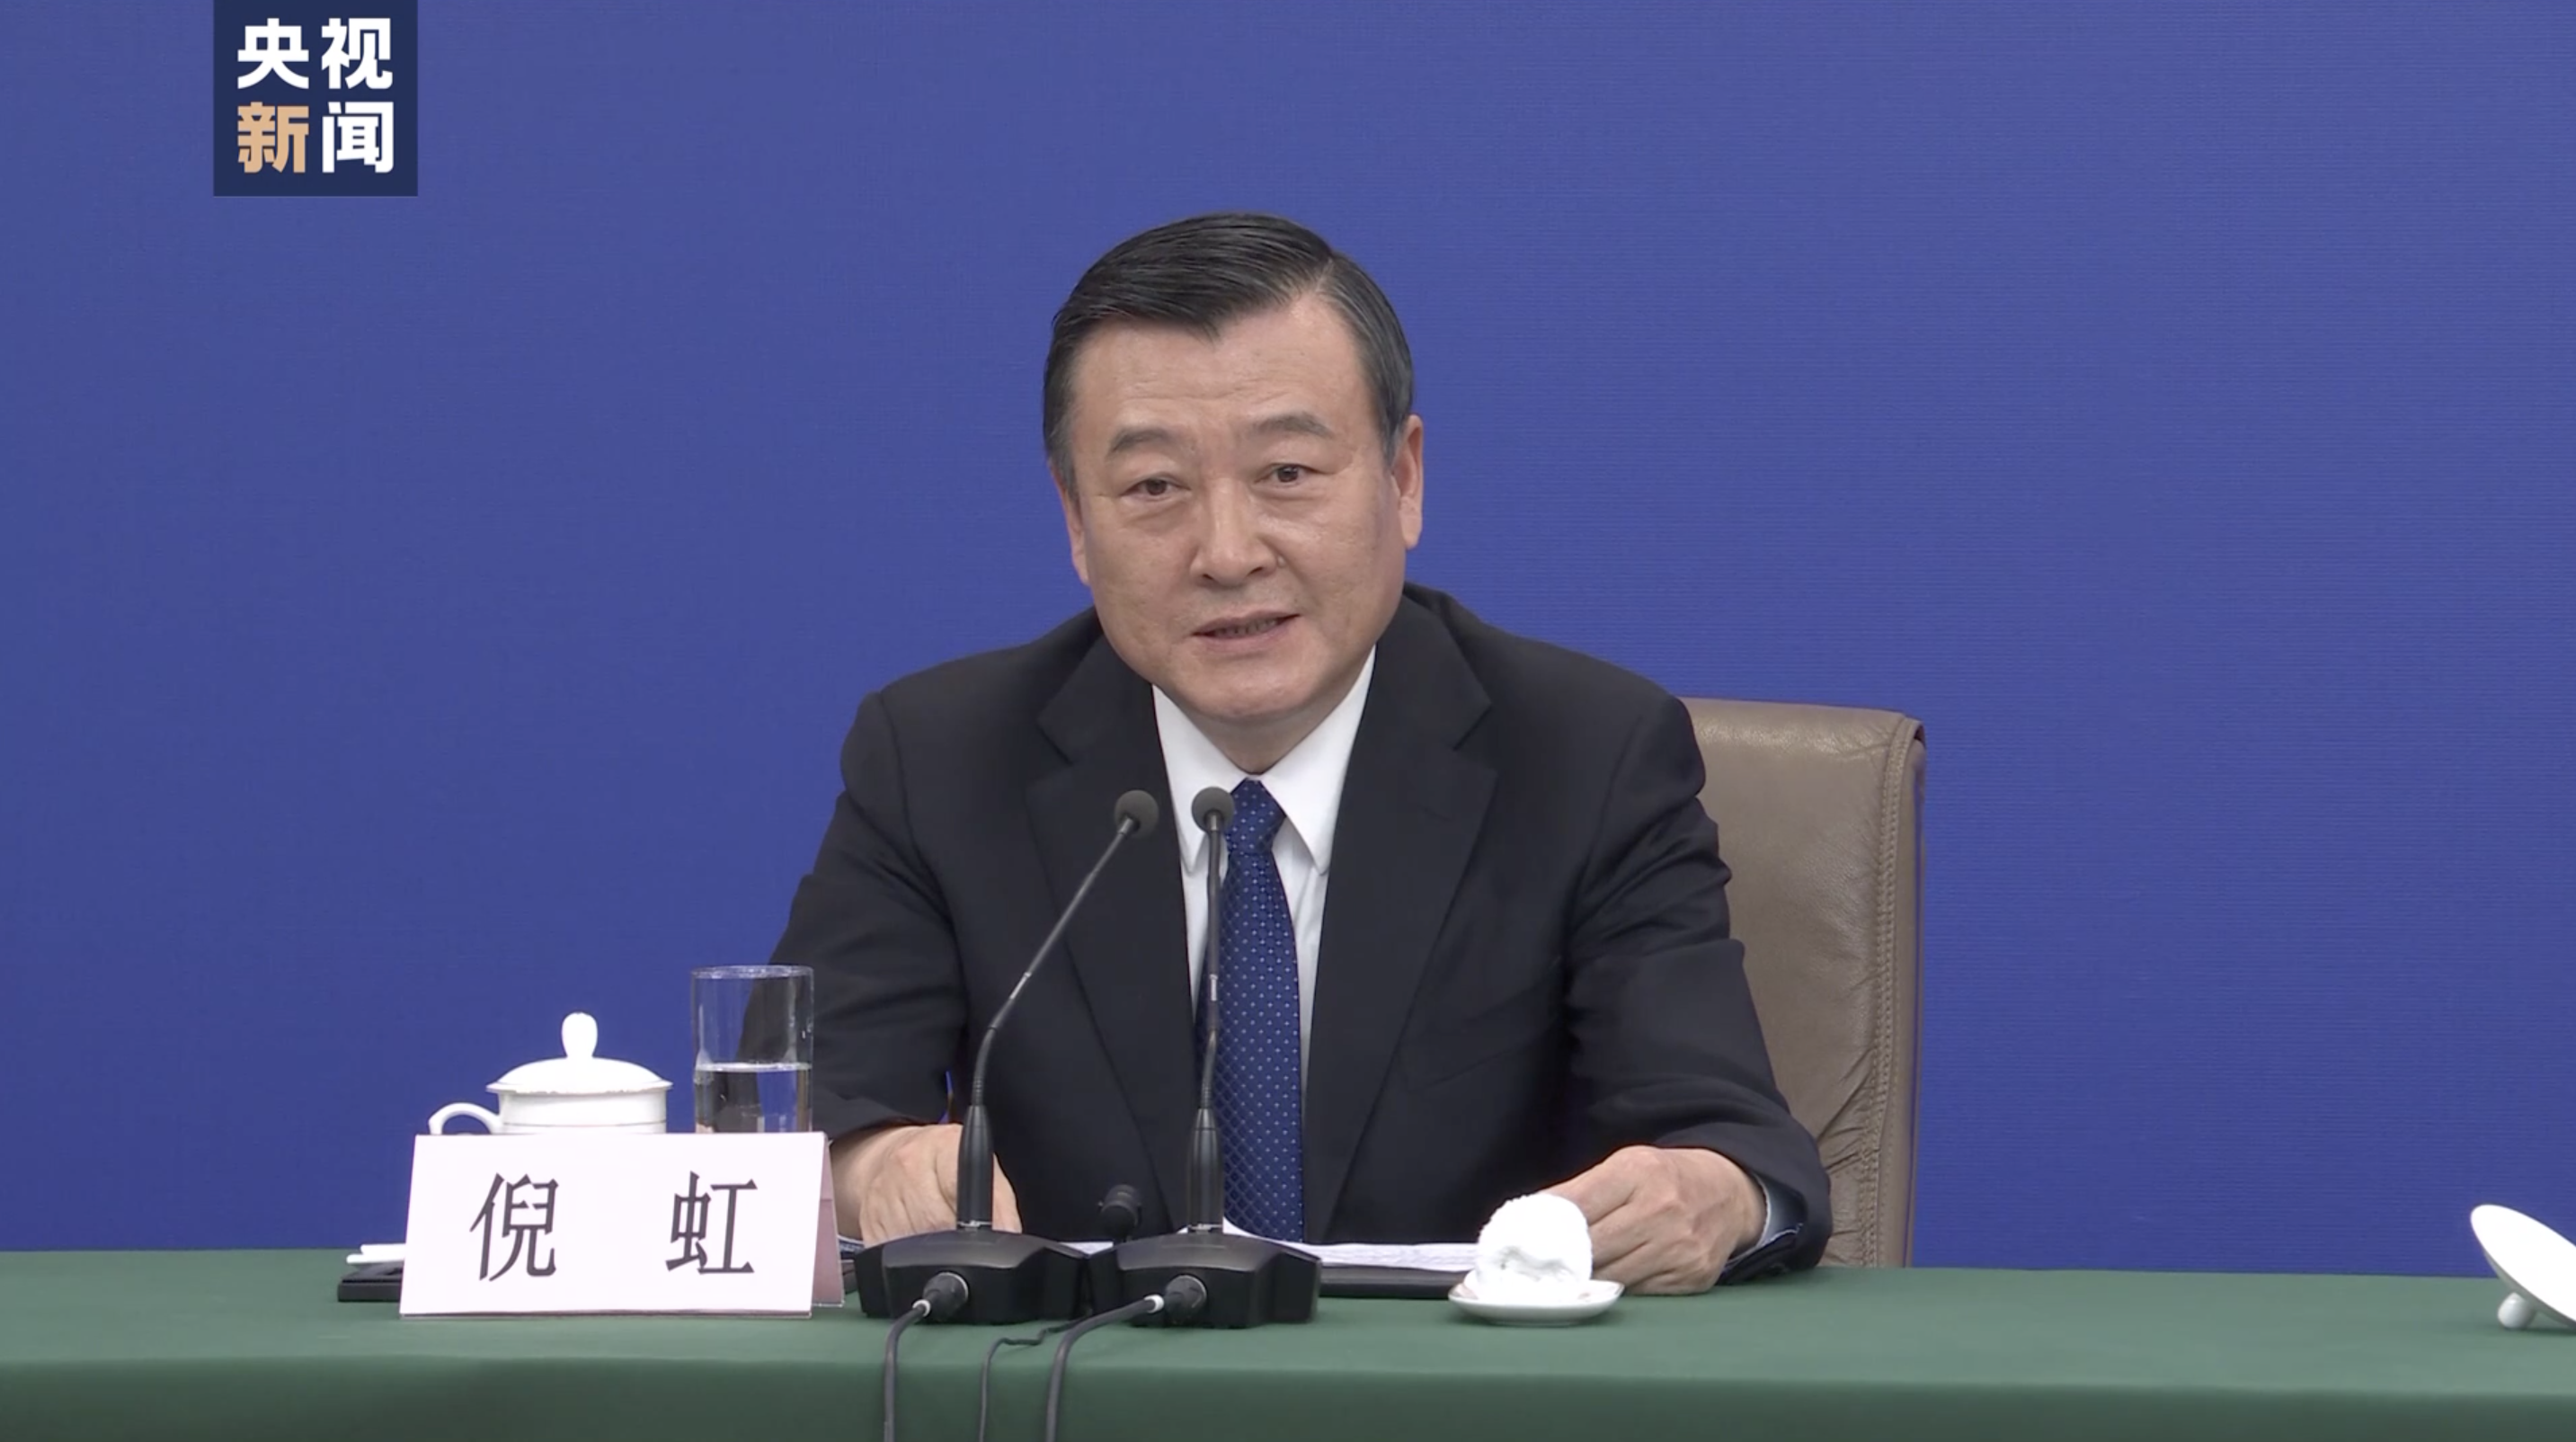 Ni Hong, minister of housing and urban-rural development, speaks at a press conference on people's livelihoods held by the second session of the 14th National People's Congress. /CMG